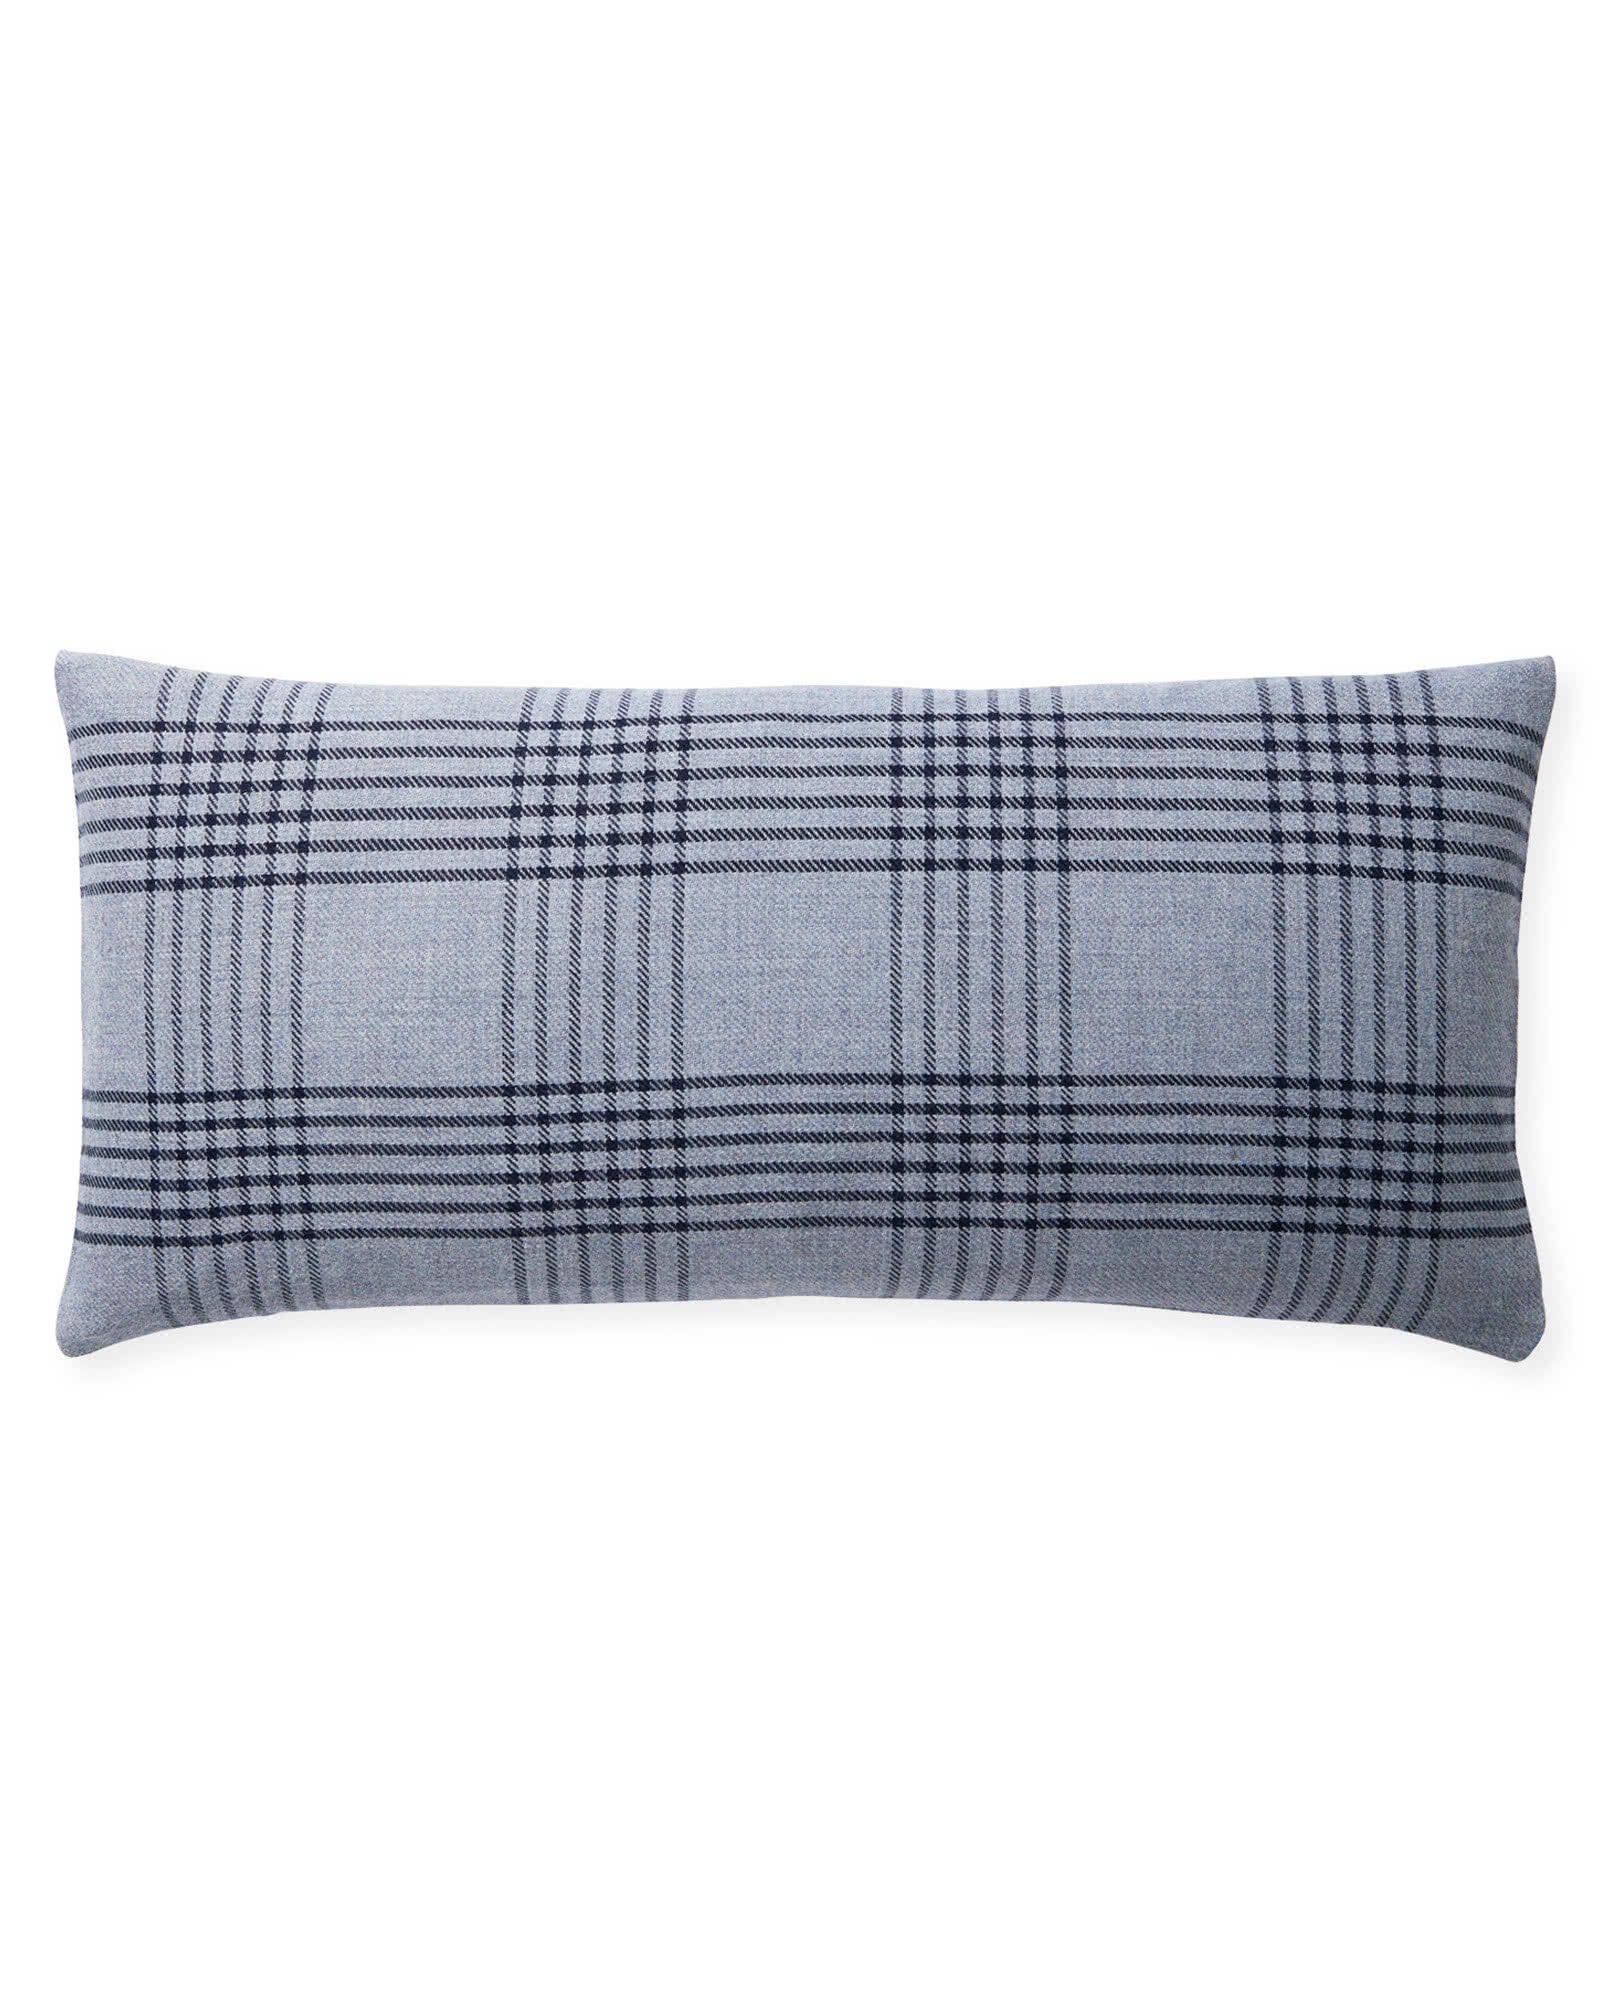 Blakely Plaid Pillow Cover | Serena and Lily